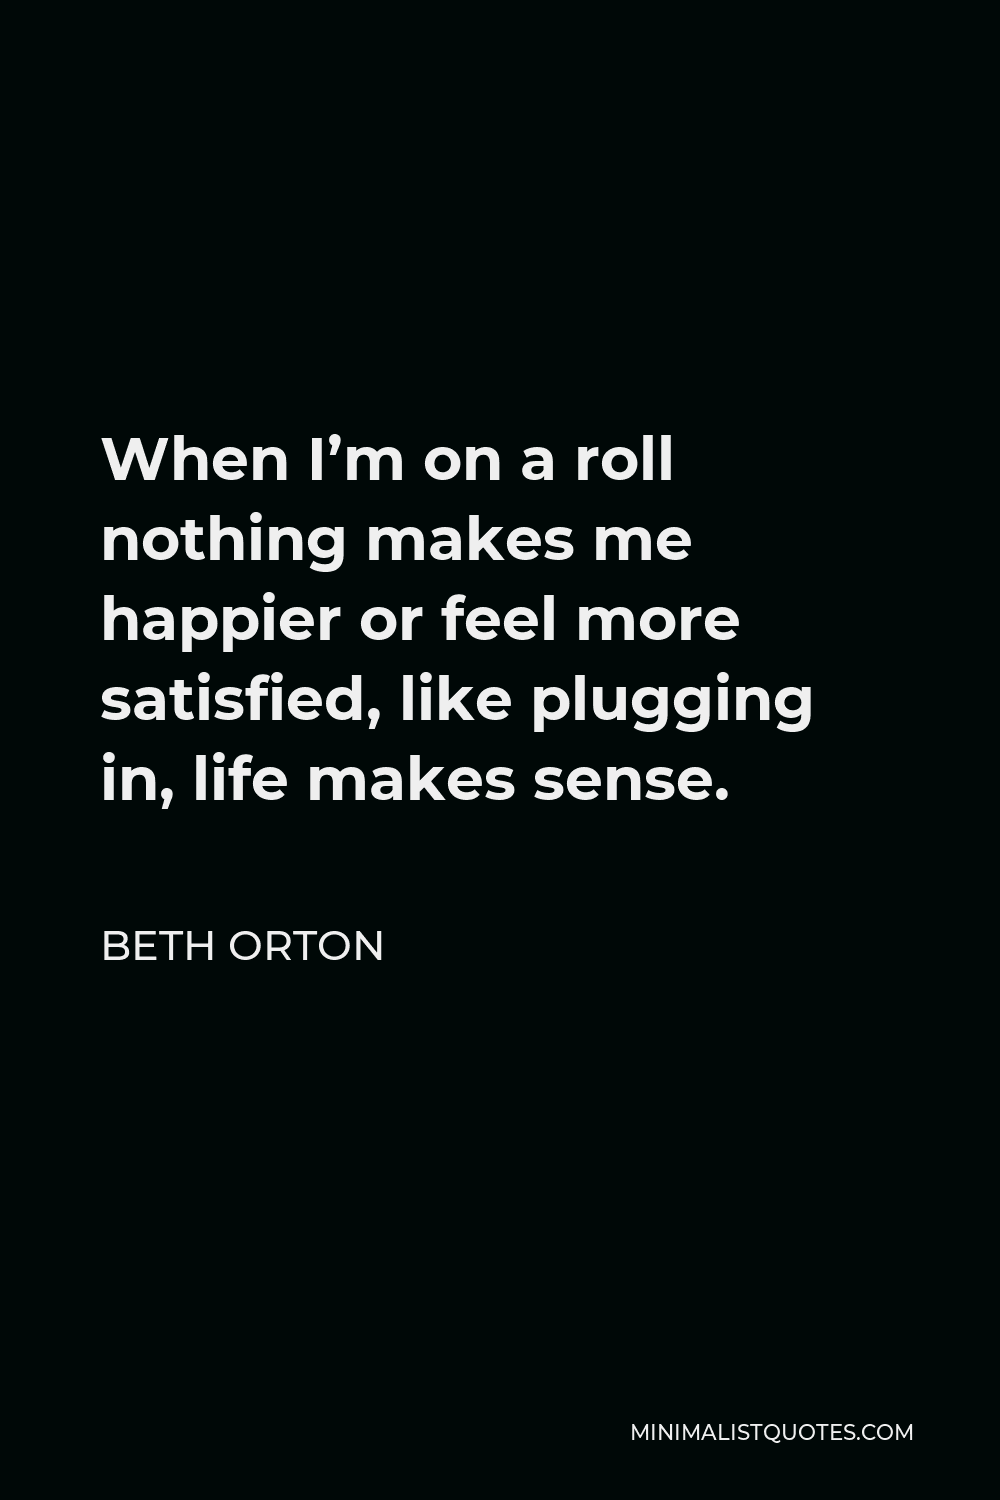 Beth Orton Quote - When I’m on a roll nothing makes me happier or feel more satisfied, like plugging in, life makes sense.